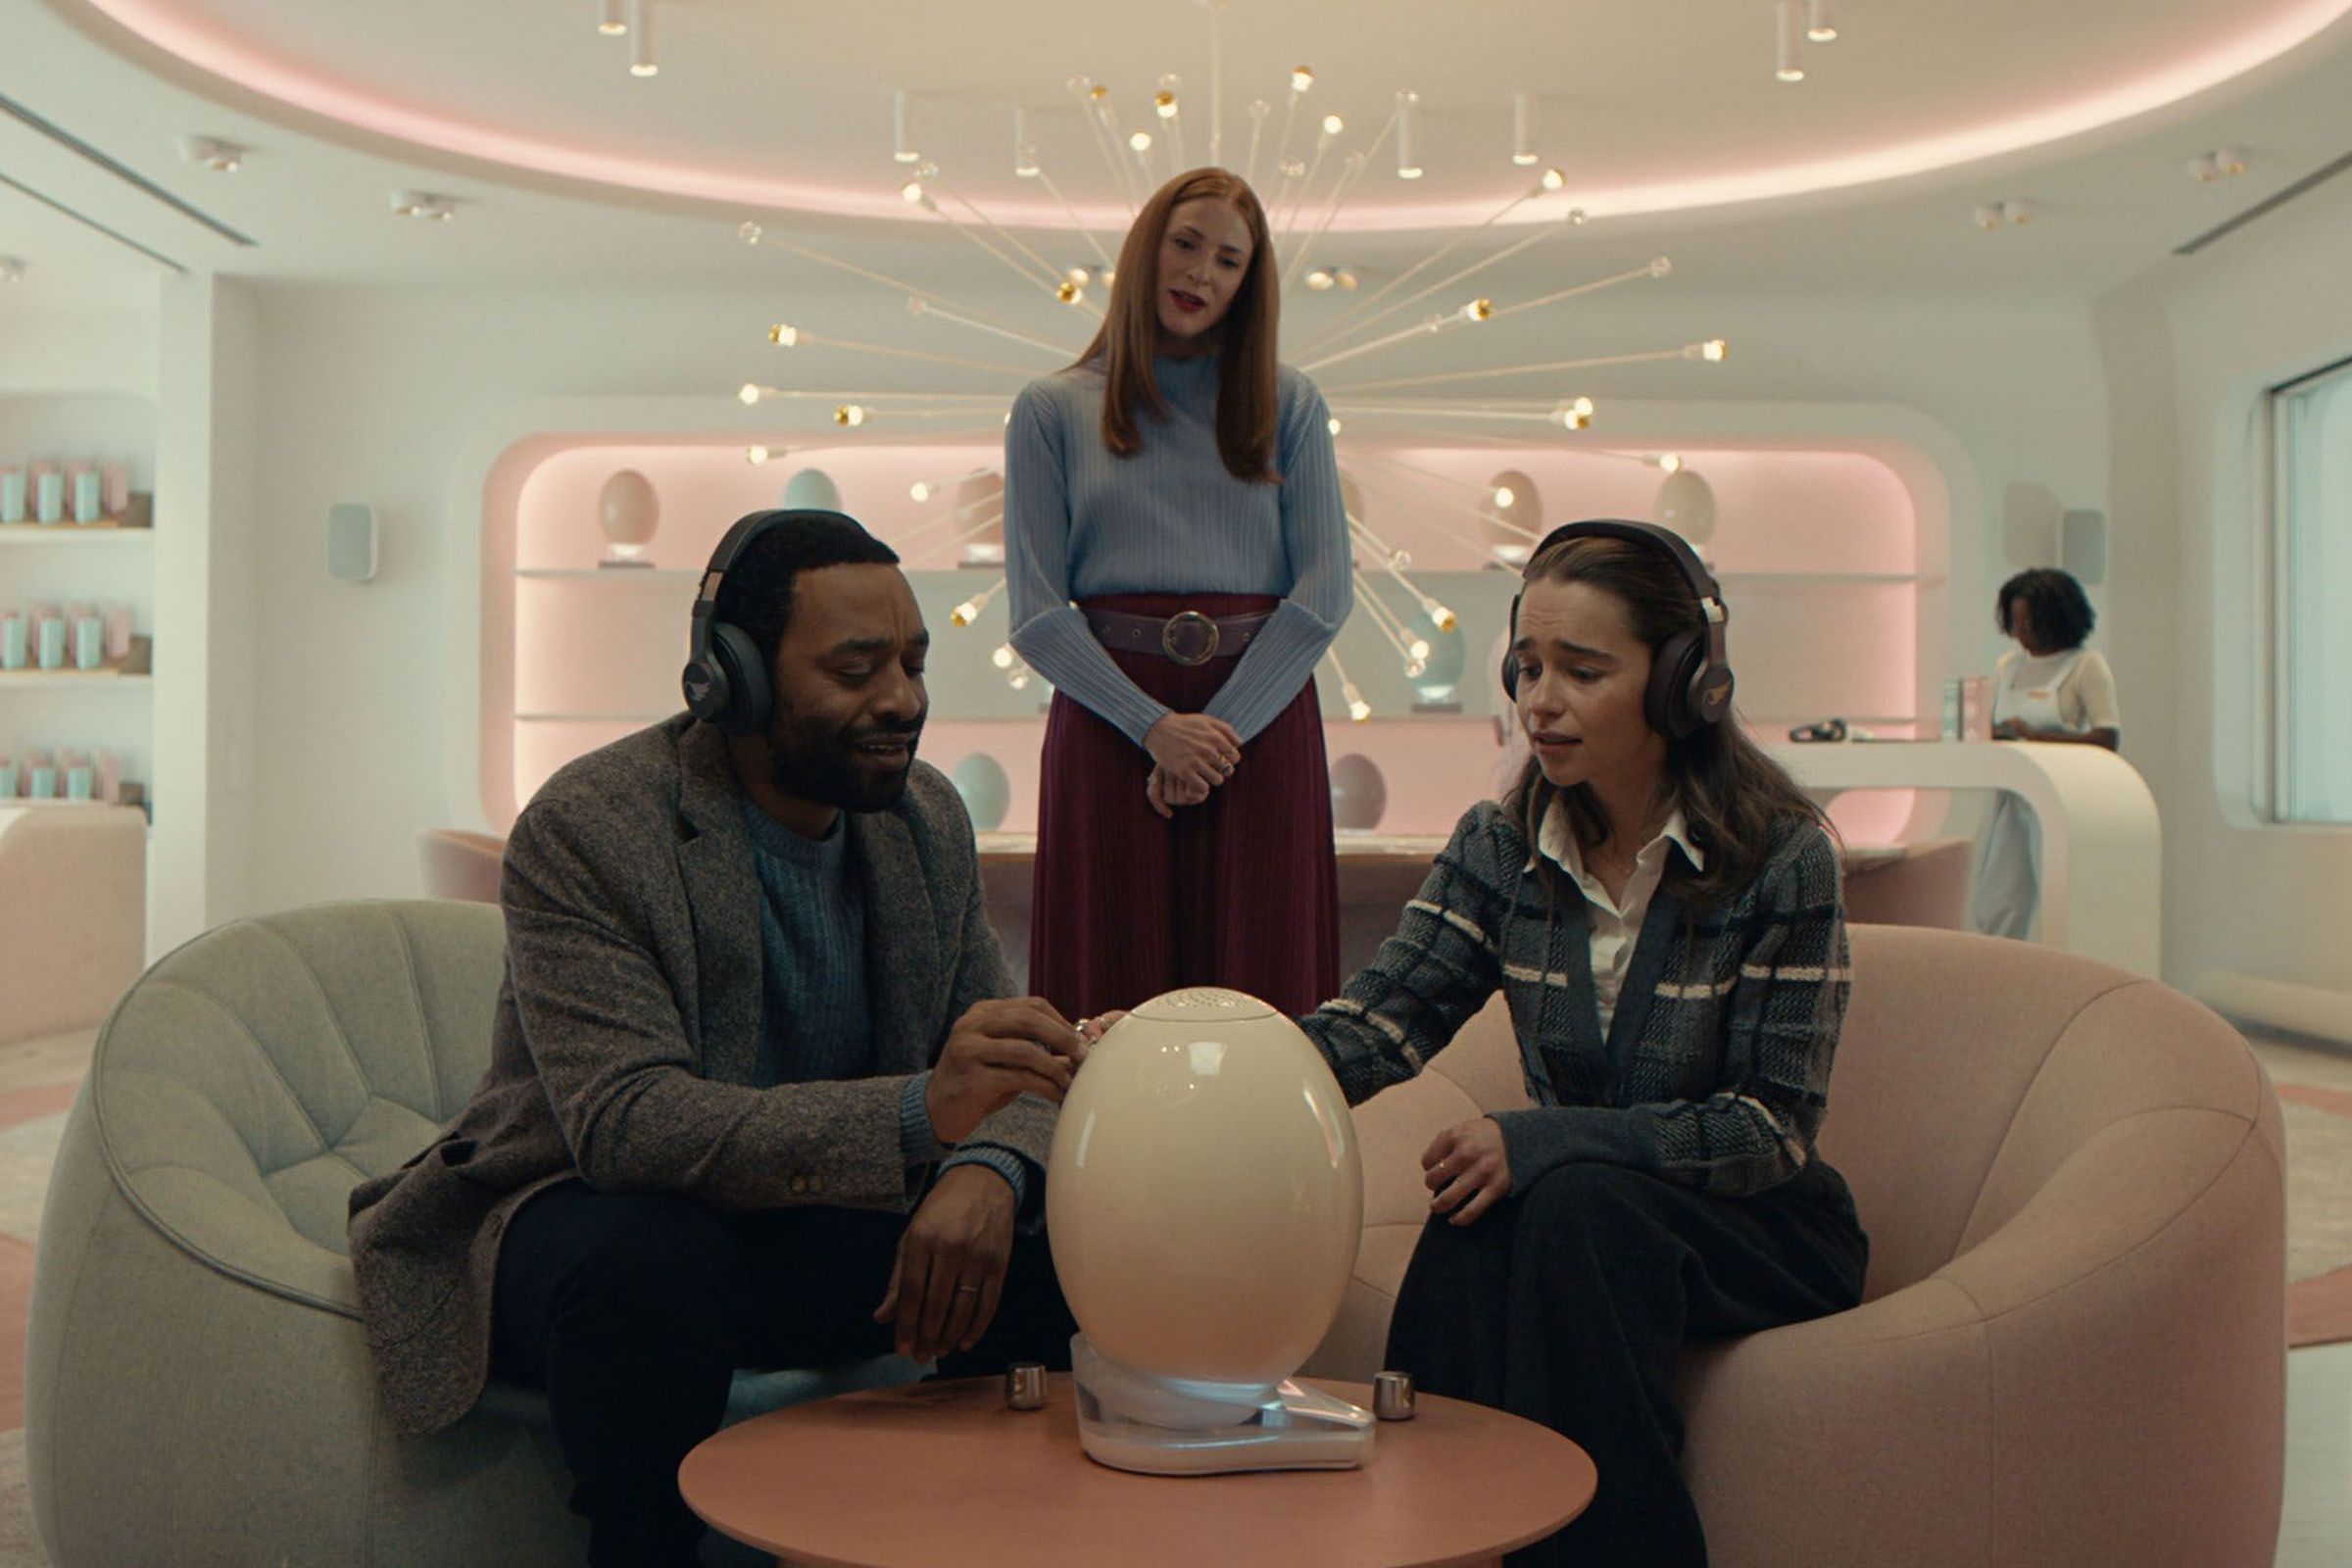 A man and a woman wearing headphones and sitting on separate loveseats as they stroke and awe at a massive, gleaming egg placed on a table between them. Behind the couple is a woman gazing down at them both while she tells them about what they’re hearing from the egg. Around them all you can see that they’re in some sort of luxury showroom for the strange eggs, more of which line the wall in holsters in the distance.